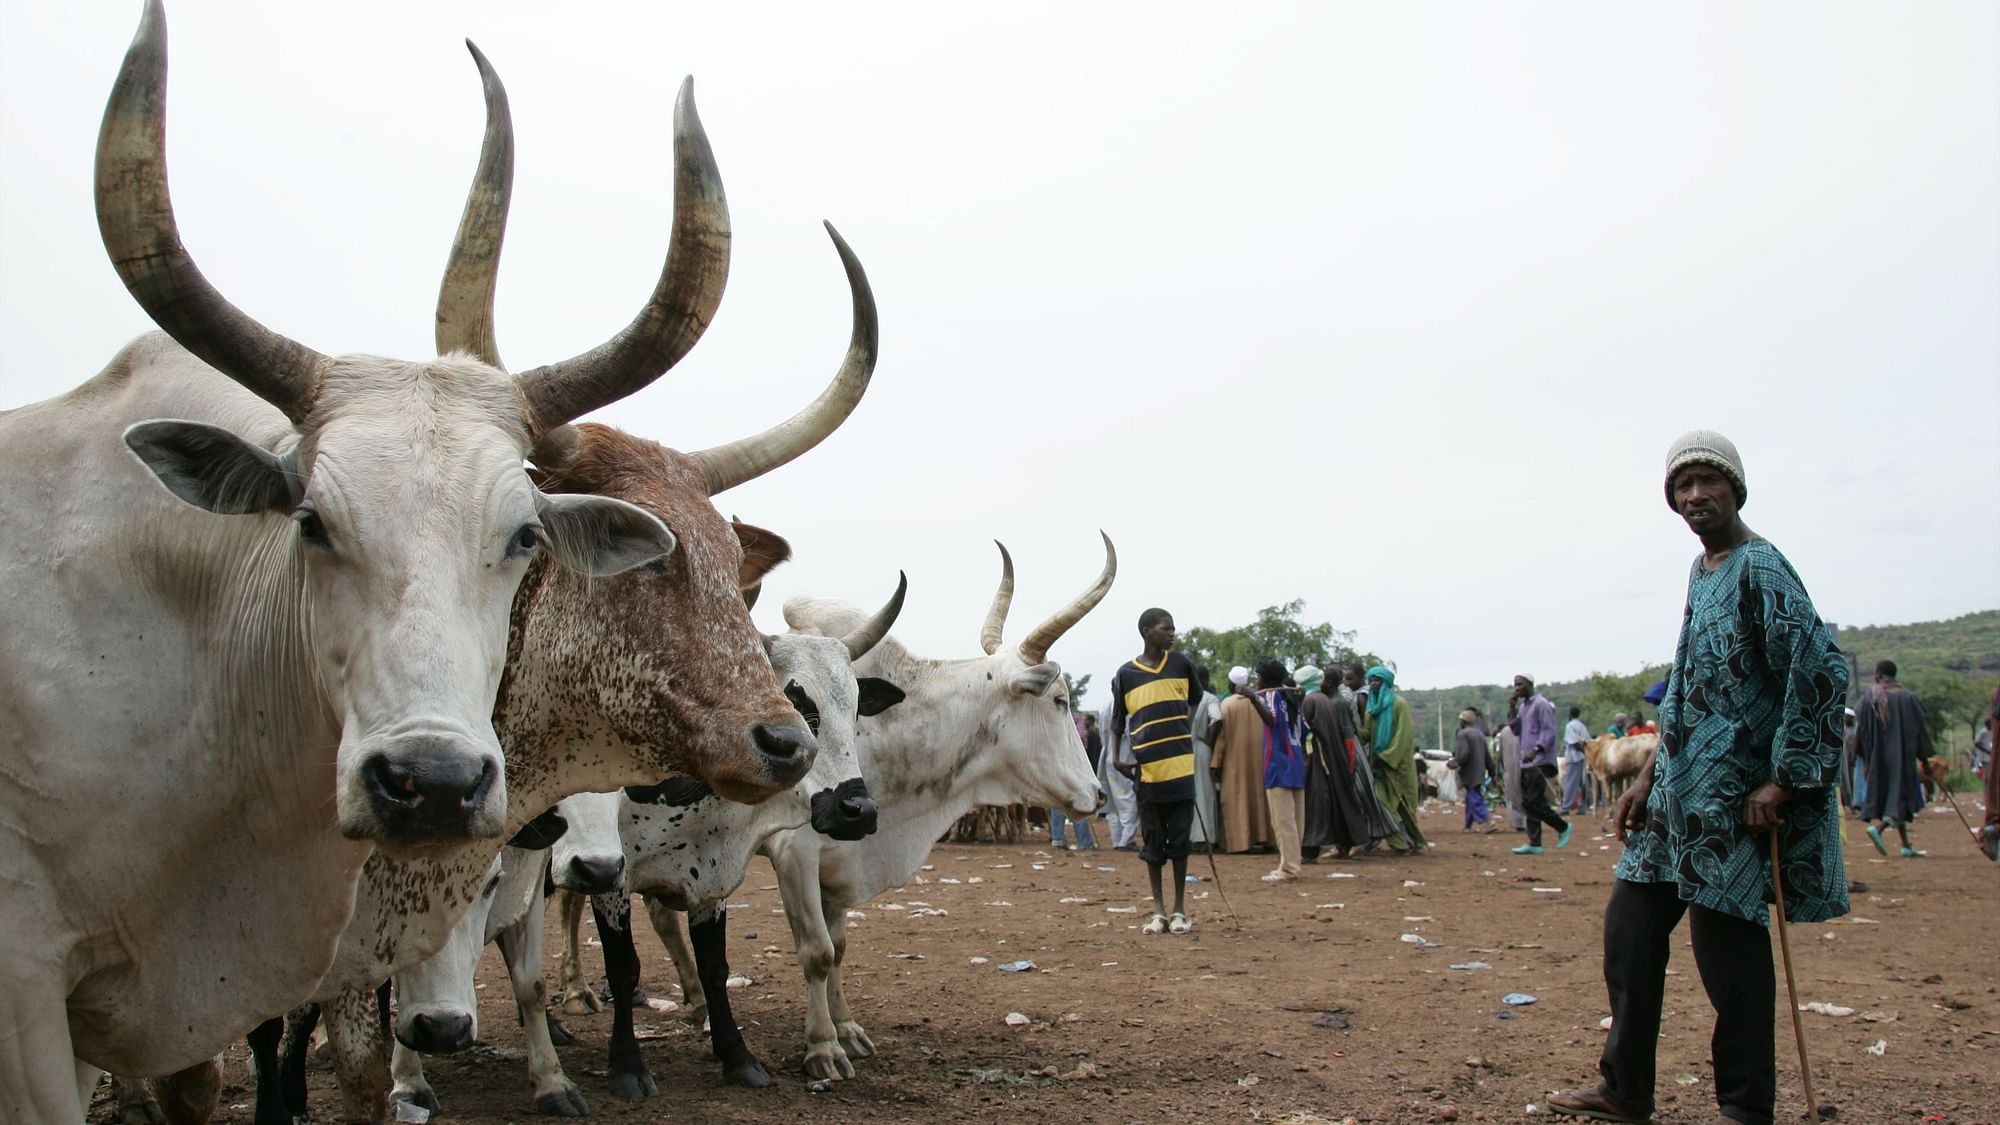 Nigeria is in the middle of a conflict between armed herdsmen called Fulani and farmers in the country’s Middle Belt states. 